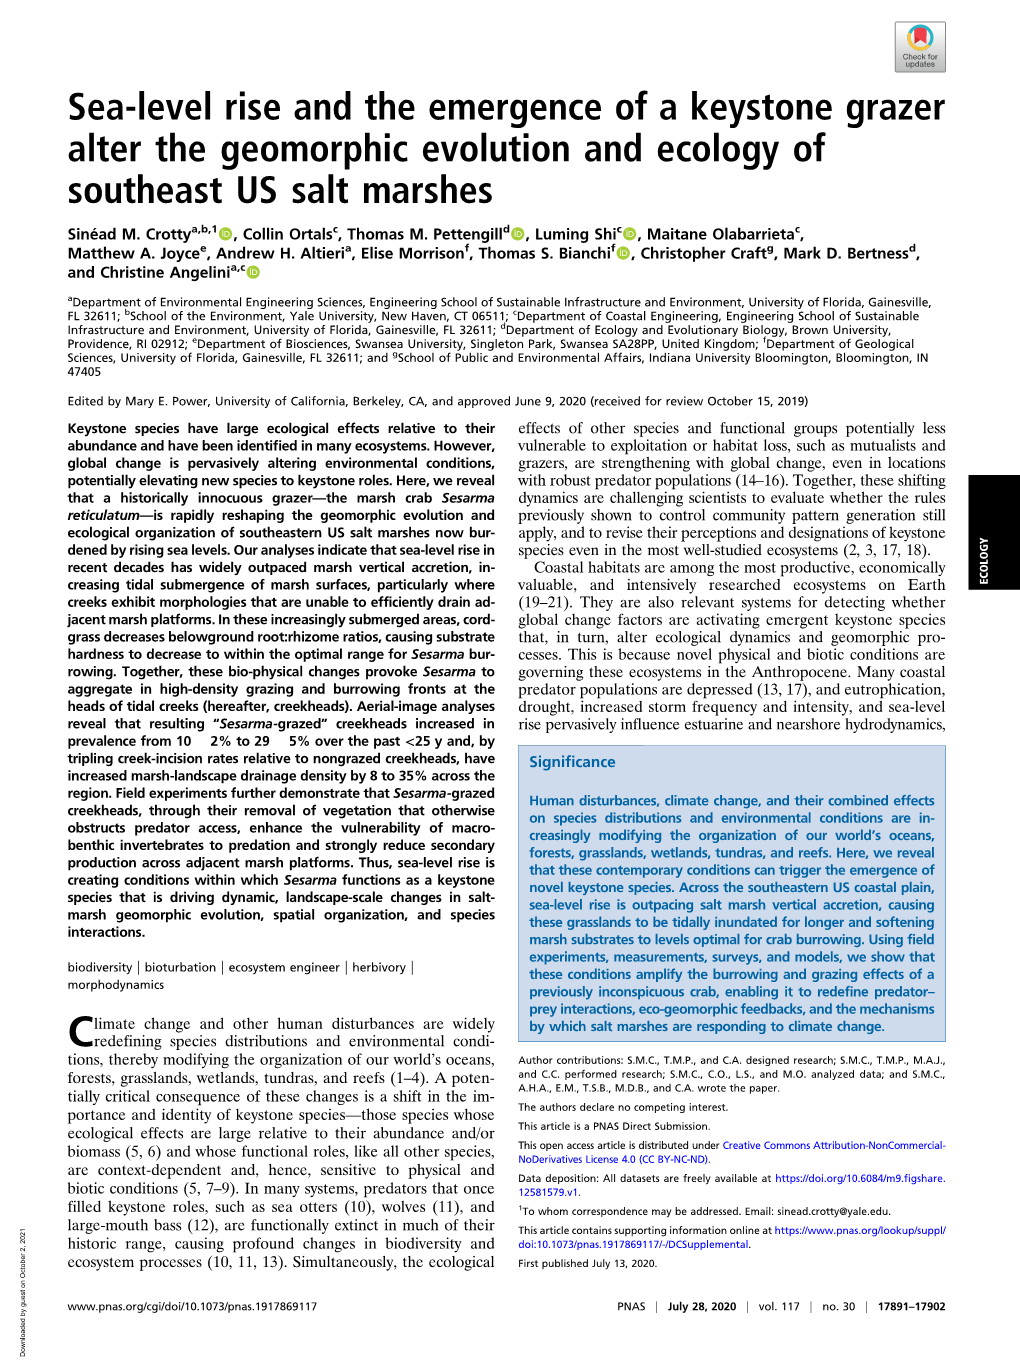 Sea-Level Rise and the Emergence of a Keystone Grazer Alter the Geomorphic Evolution and Ecology of Southeast US Salt Marshes